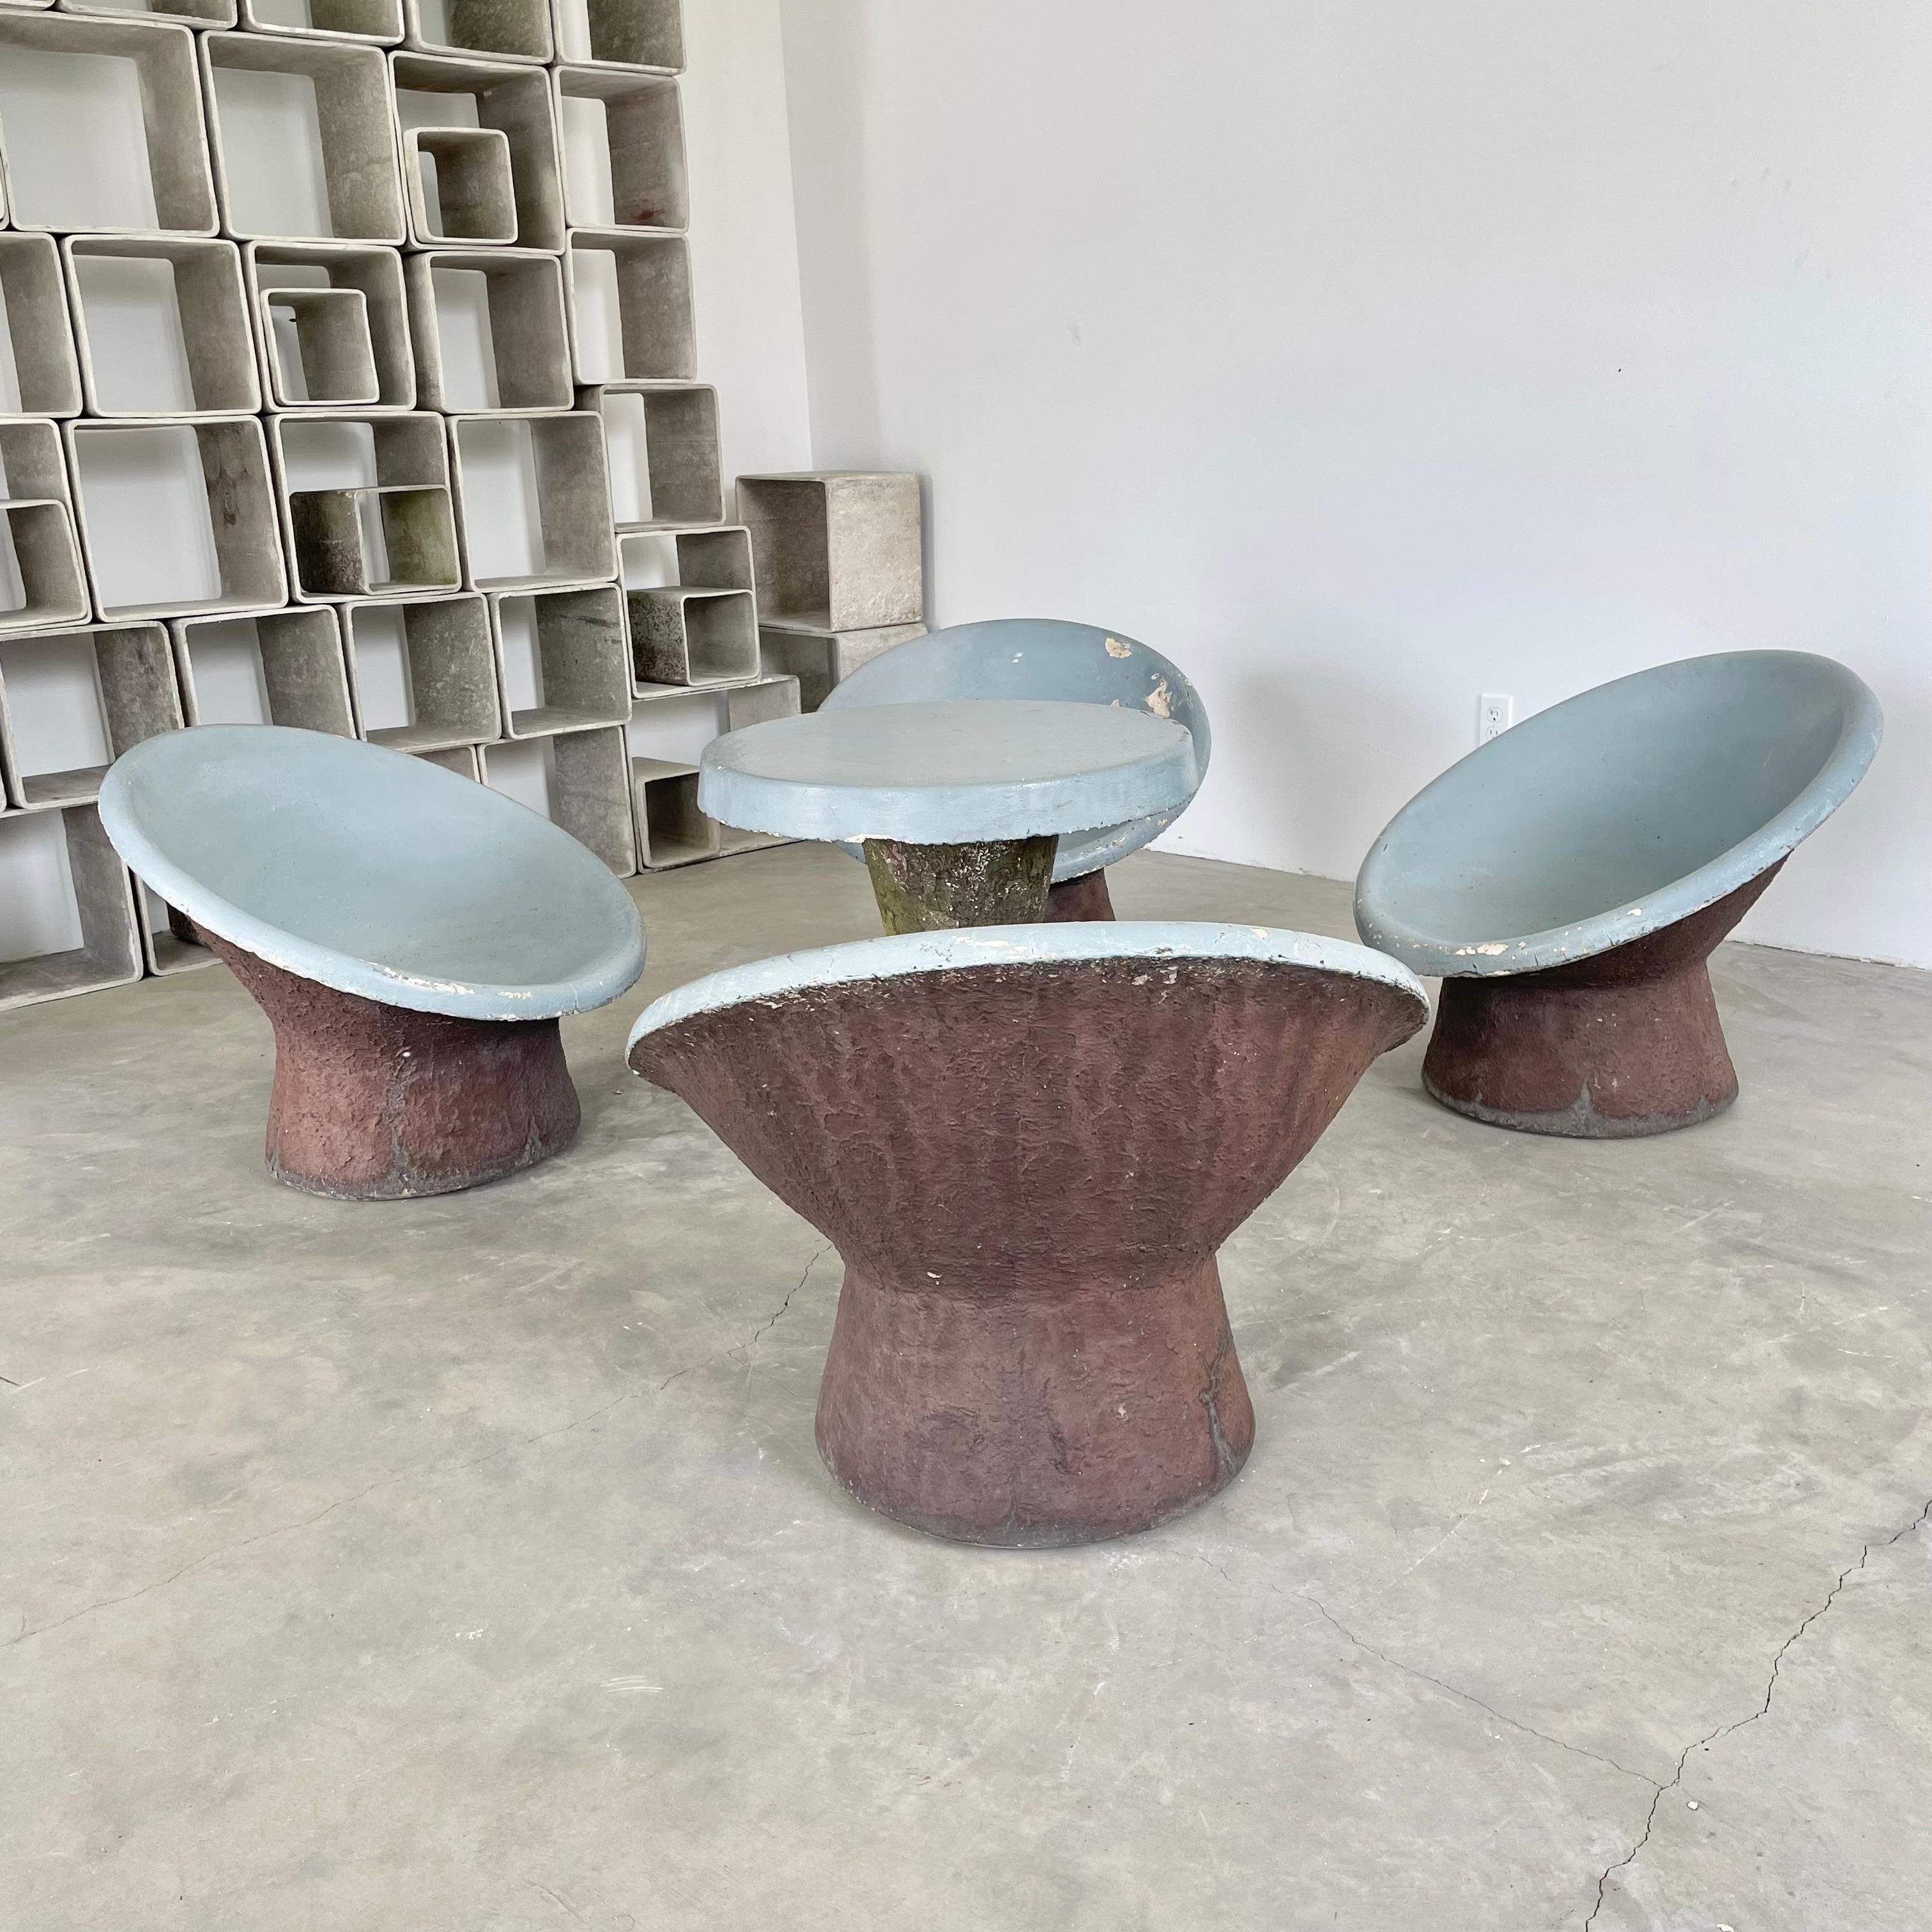 Modern Sculptural Concrete Chairs and Table, 1960s, Switzerland For Sale